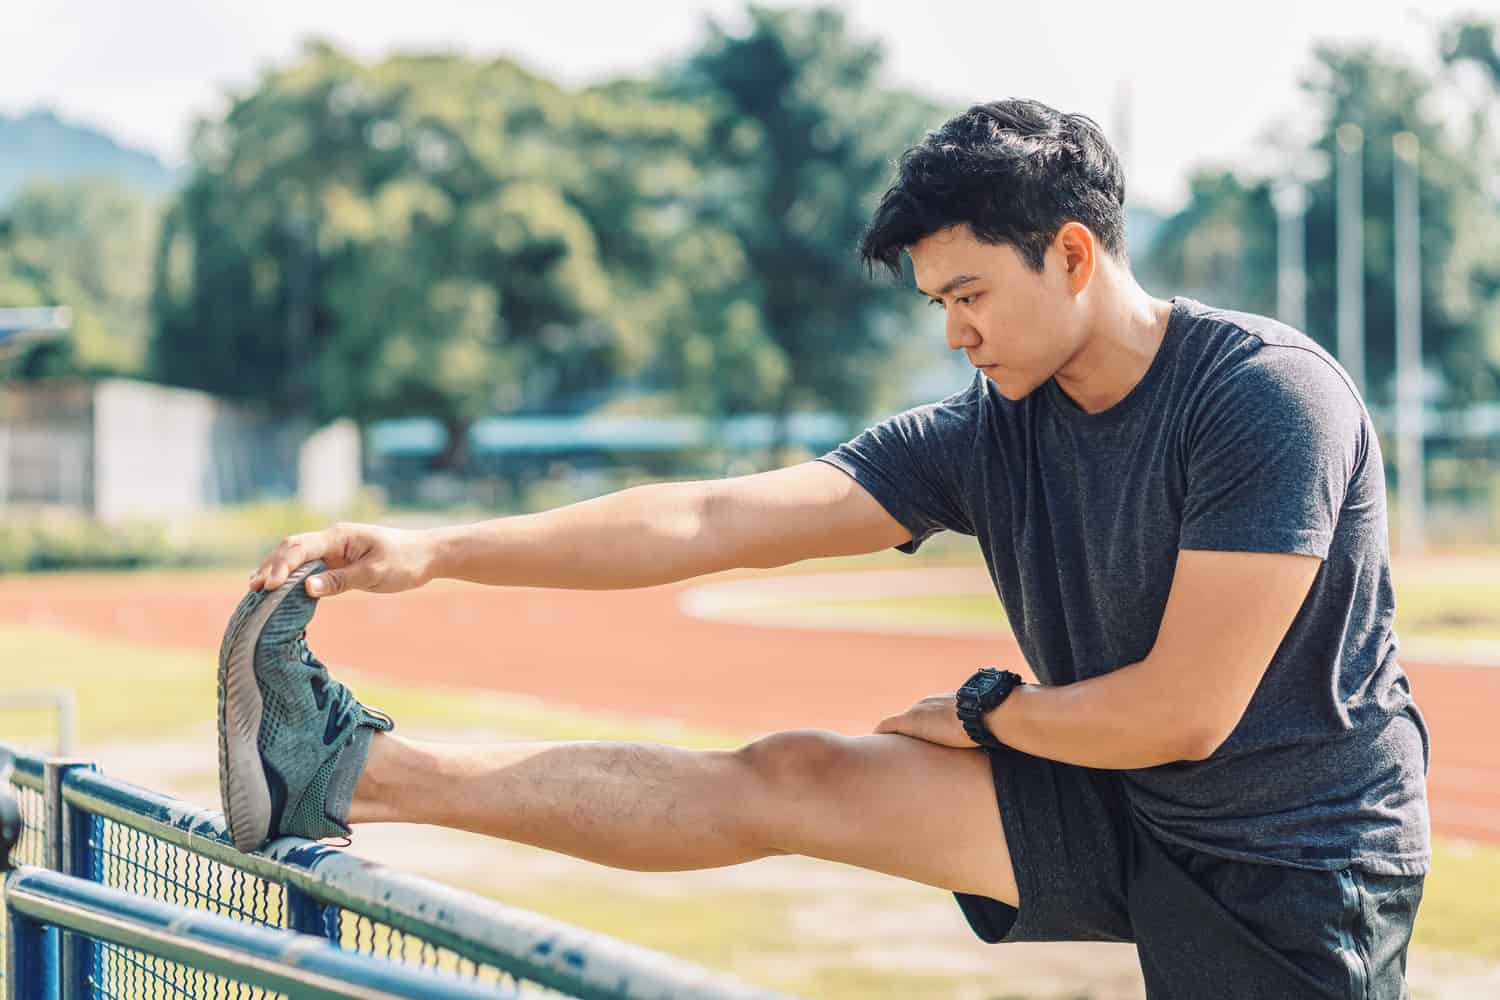 A young man stretching for track.